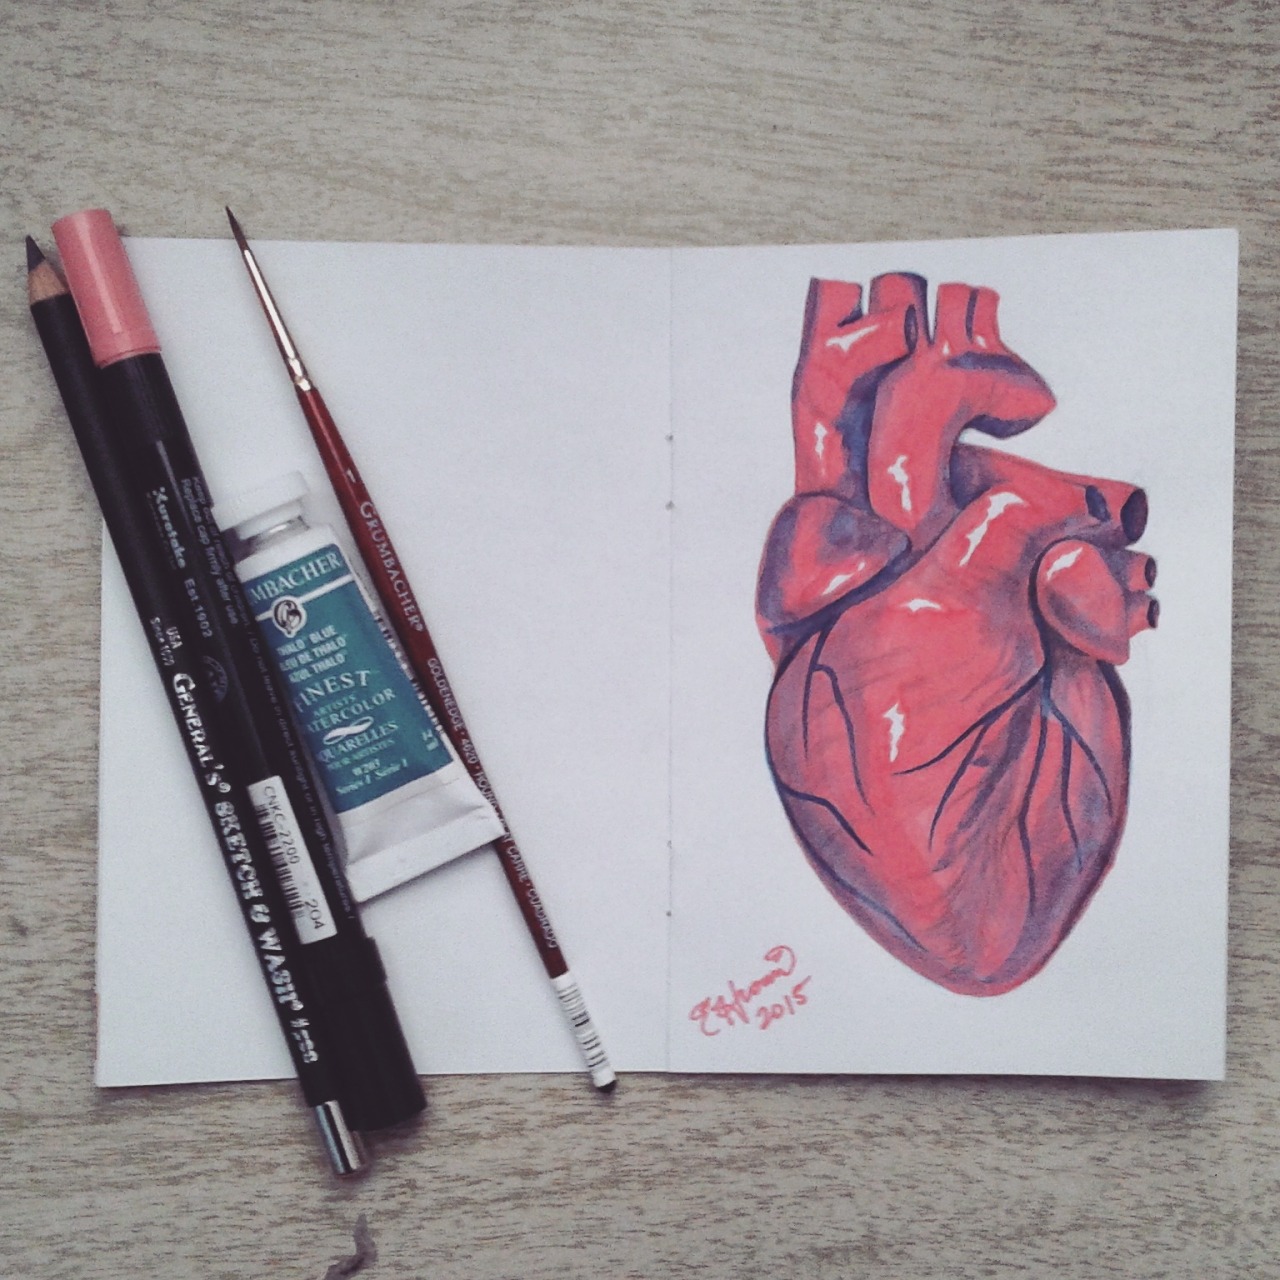 emilyhromi: February’s ArtSnacks! Happy Valentine’s Day, everyone! ArtSnacks is like a magazine subscription but instead of a magazine you get 4 or 5 different art products to try out. Learn more about ArtSnacks here.